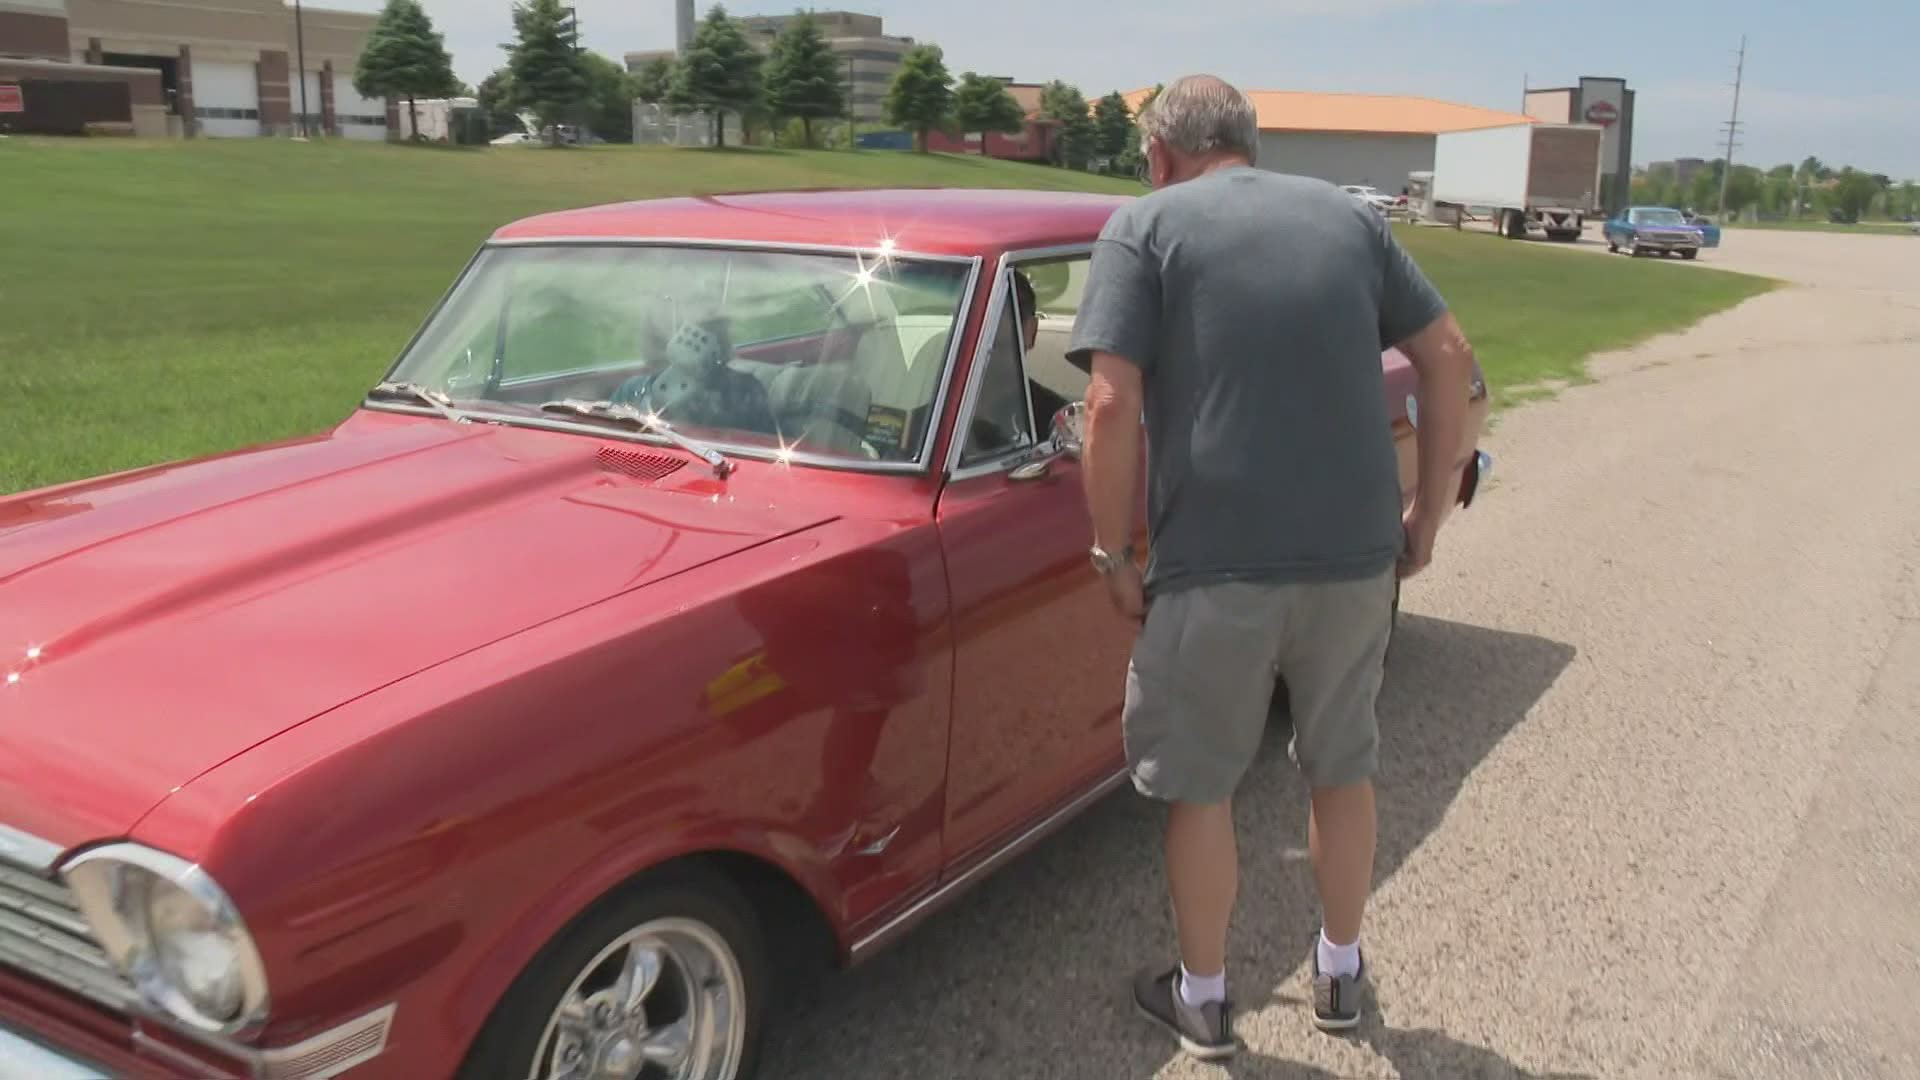 Back to the Bricks is an annual week-long car festival in Genesee County that takes place the week of August 16.